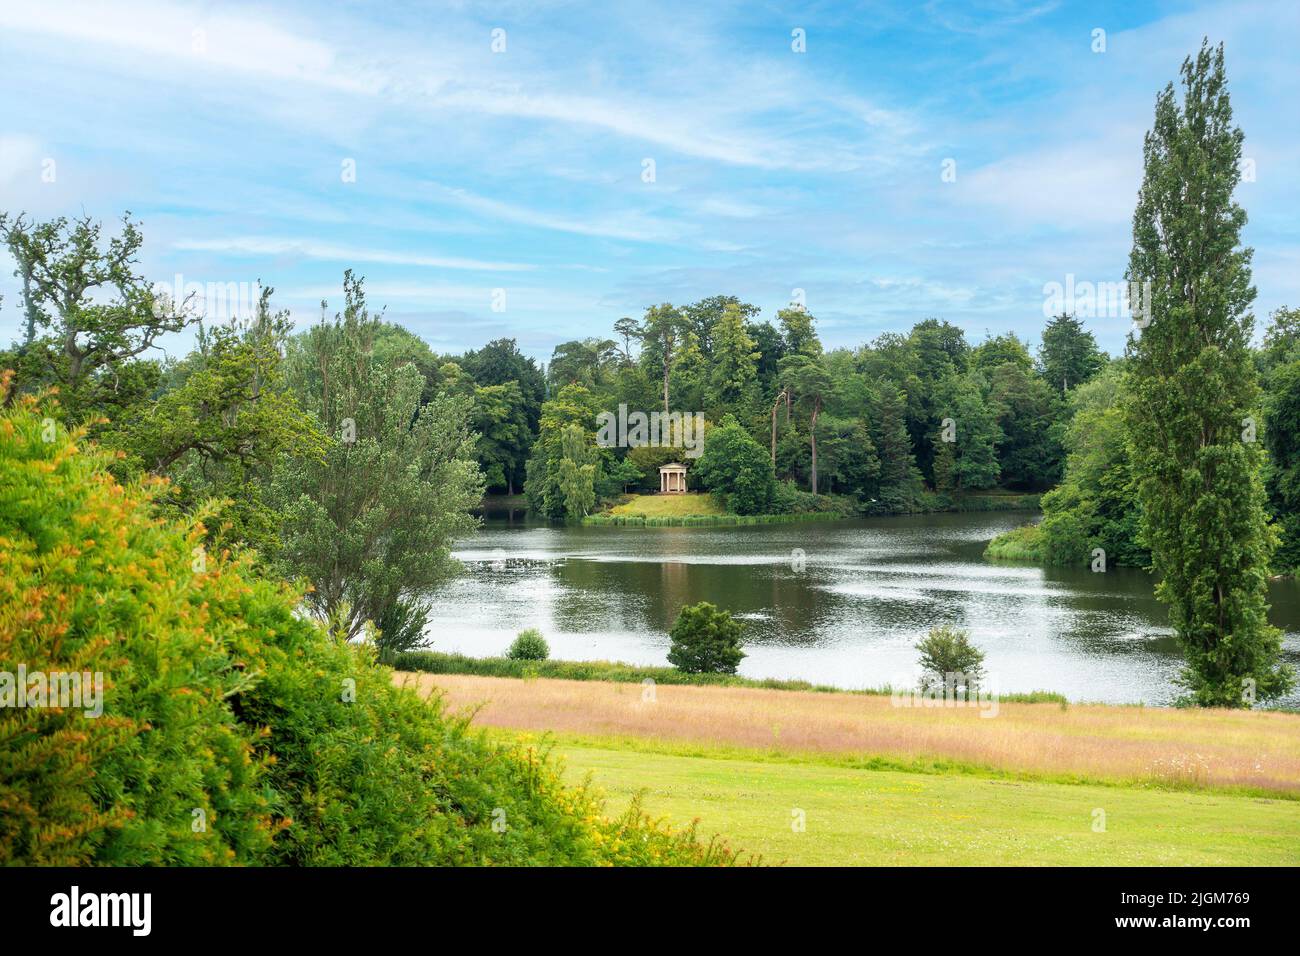 Lake and Temple, Bowood House and Gardens, Wiltshire, Royaume-Uni Banque D'Images